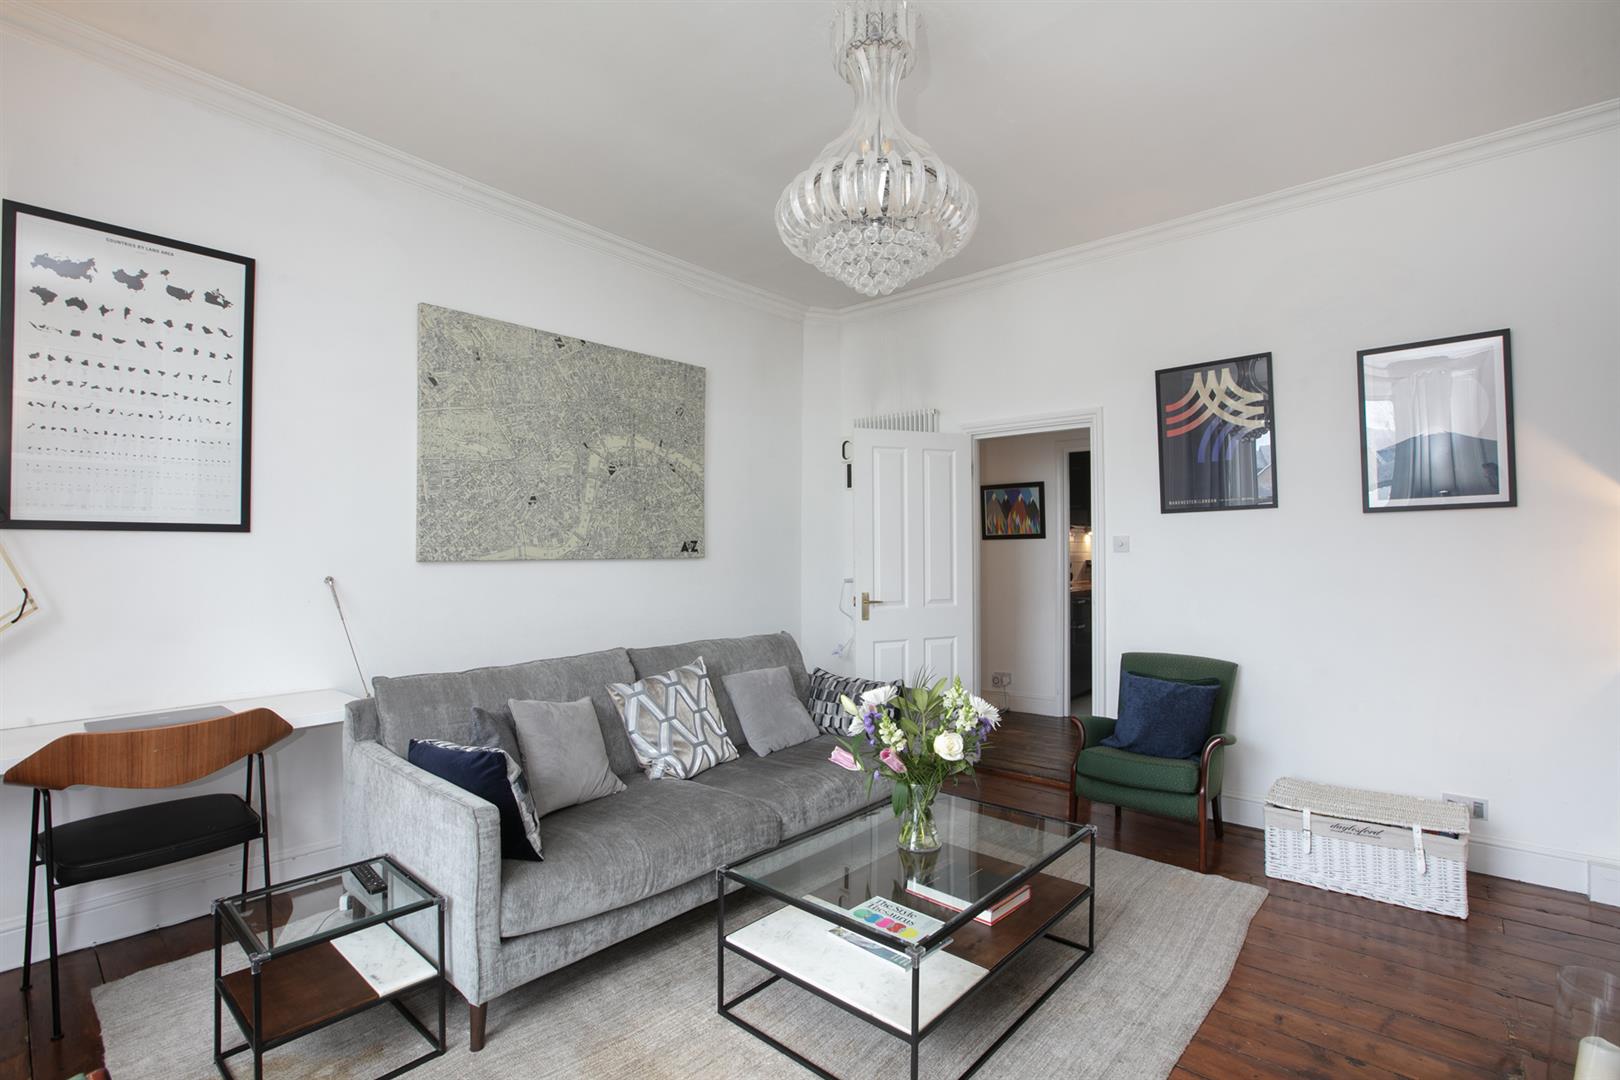 Flat - Conversion For Sale in Consort Road, Nunhead, SE15 1183 view10